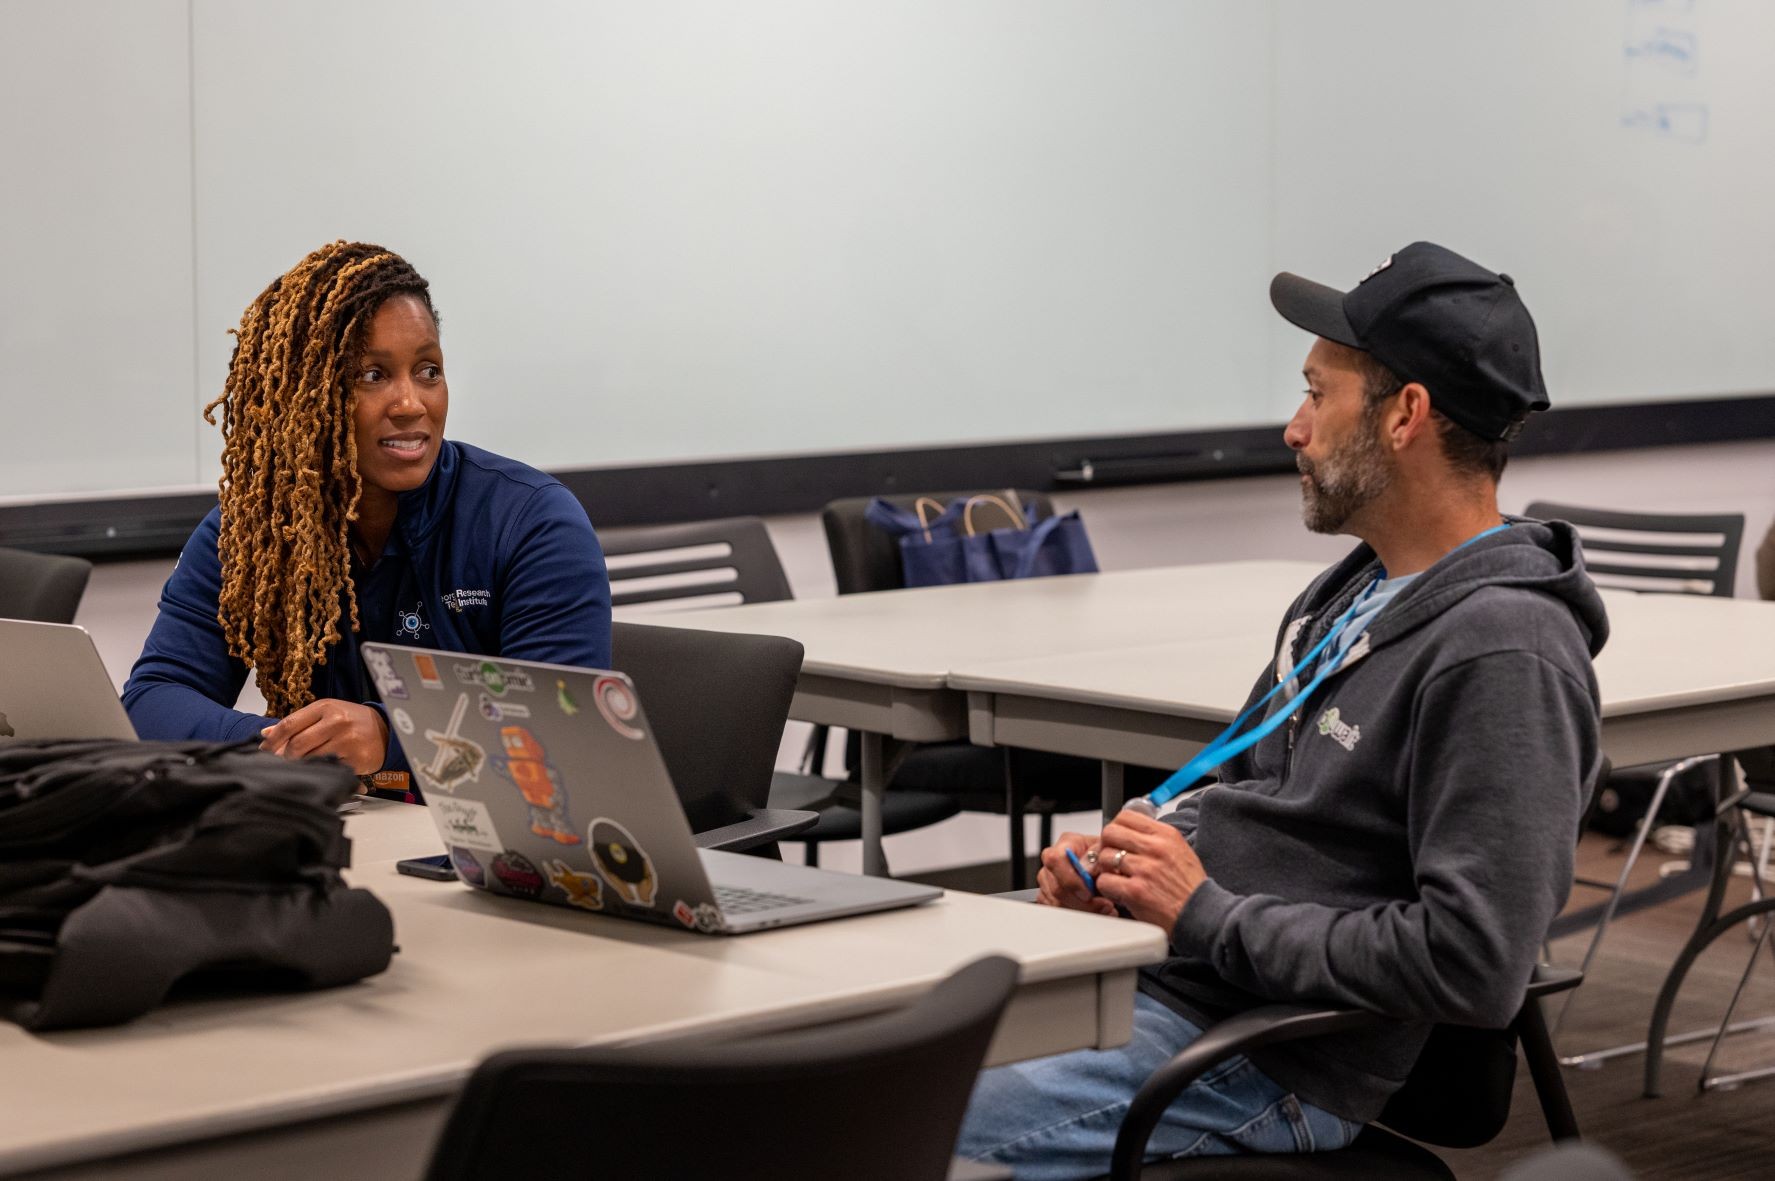 LaVonda meeting with her technical mentor in Seattle during week 1 of the Impact Accelerator for Black Founders